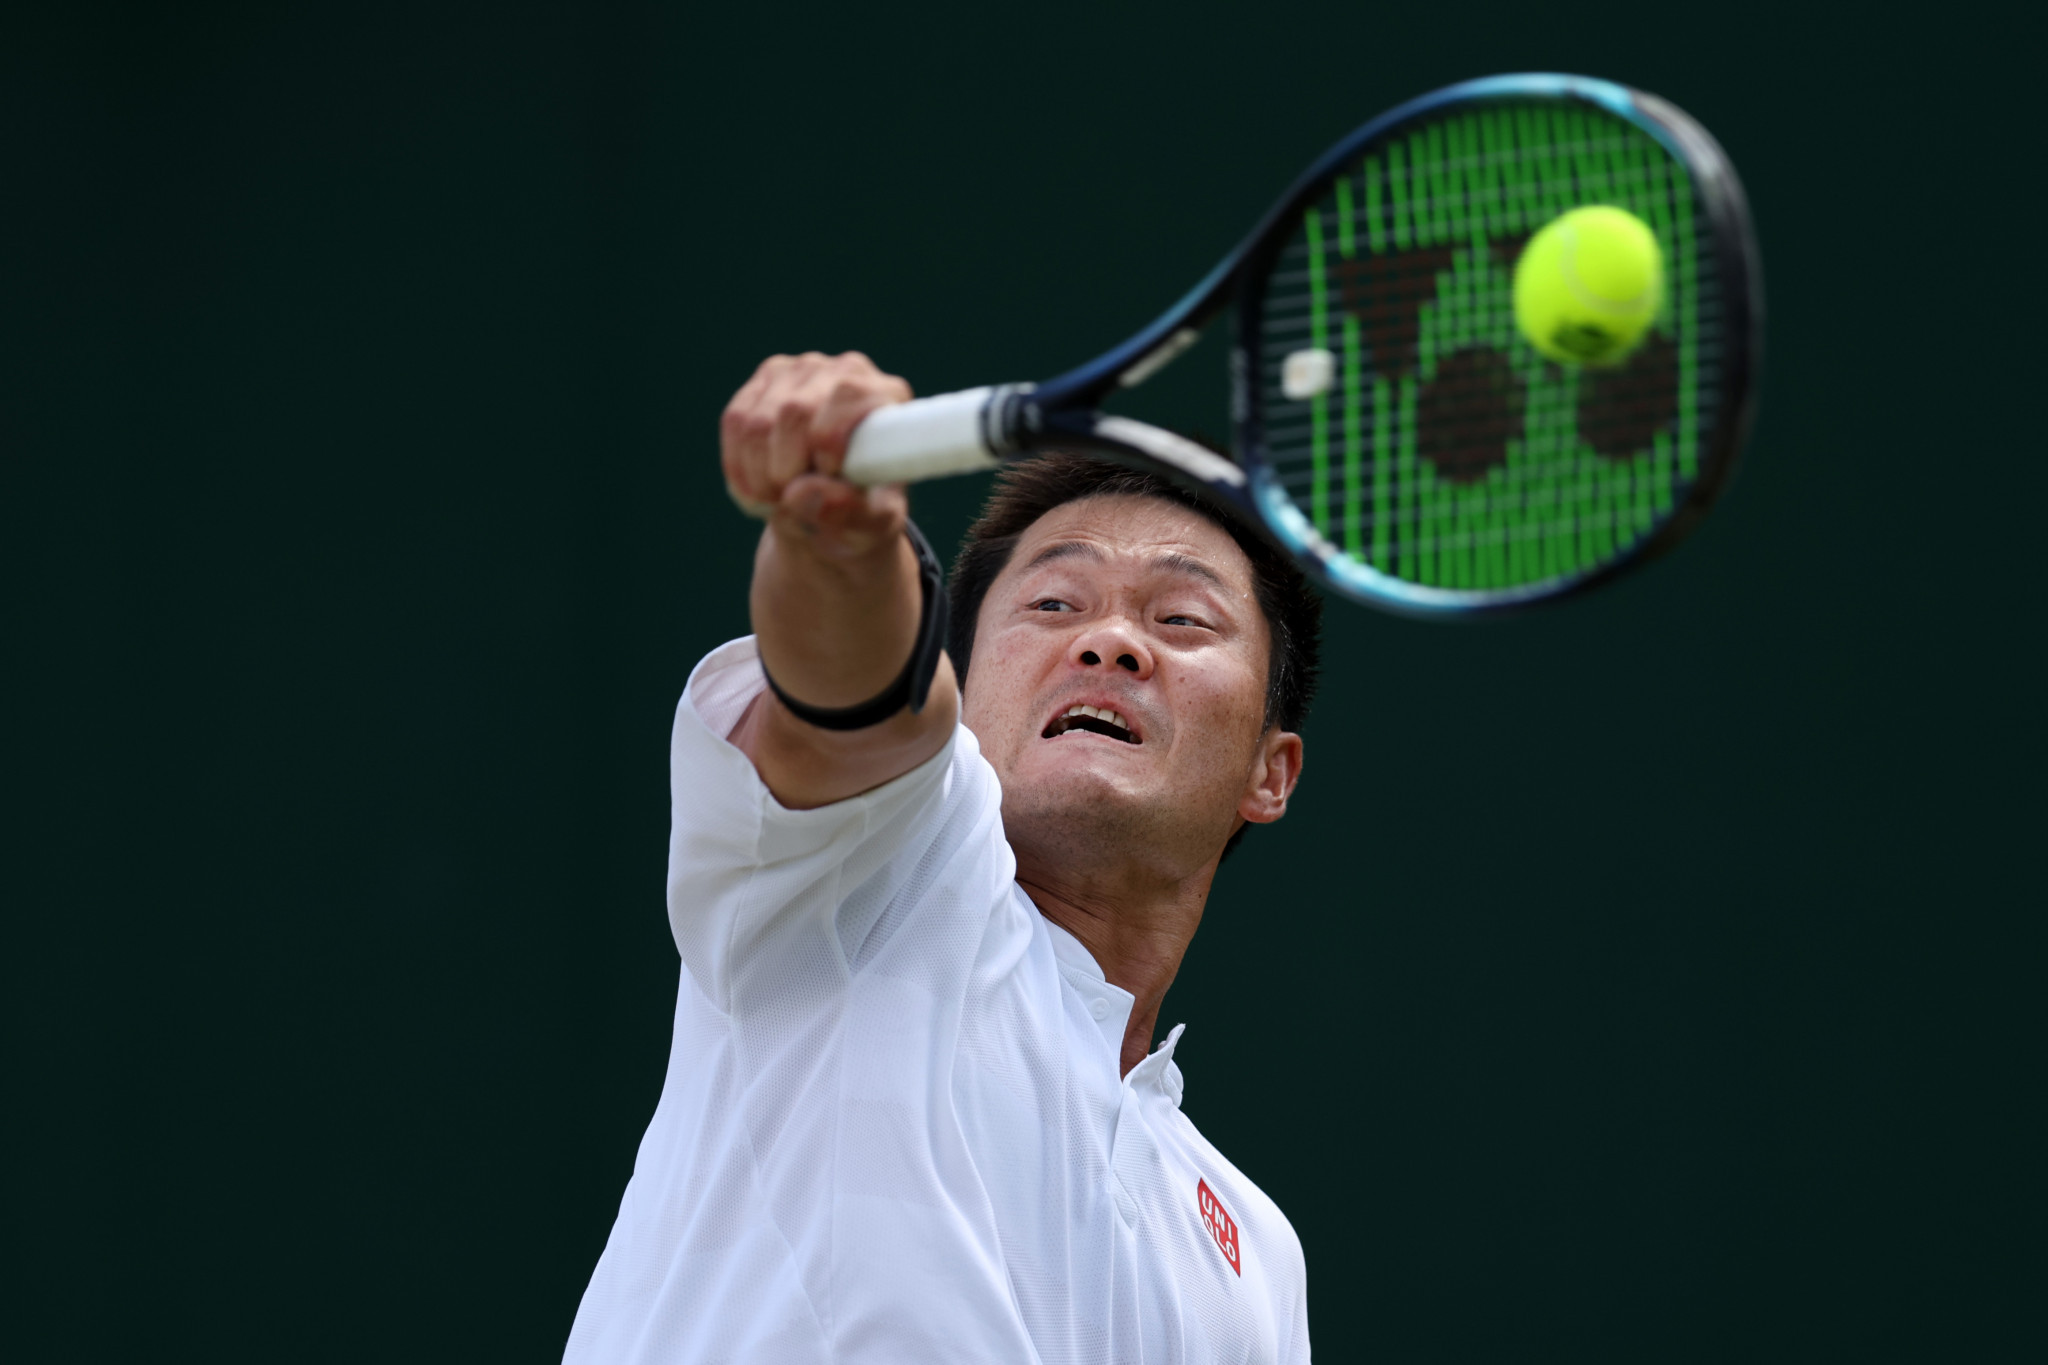 Japan's Shingo Kunieda has the chance to win his maiden wheelchair men's singles title at Wimbledon after Belgium’s Joachim Gerard in the semi-final ©Getty Images